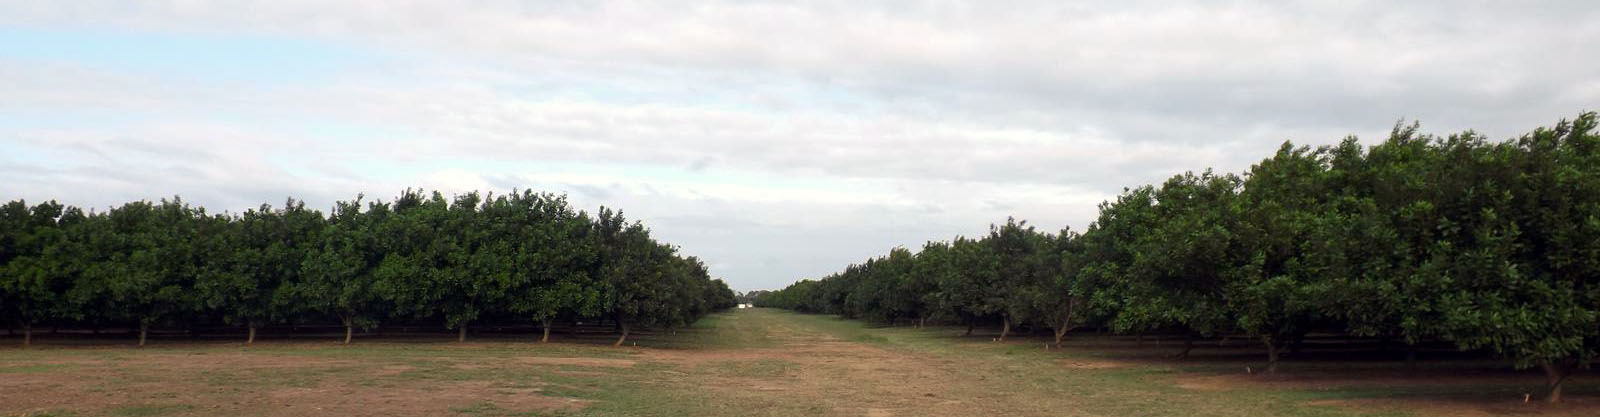 Welcome Creek Orchard